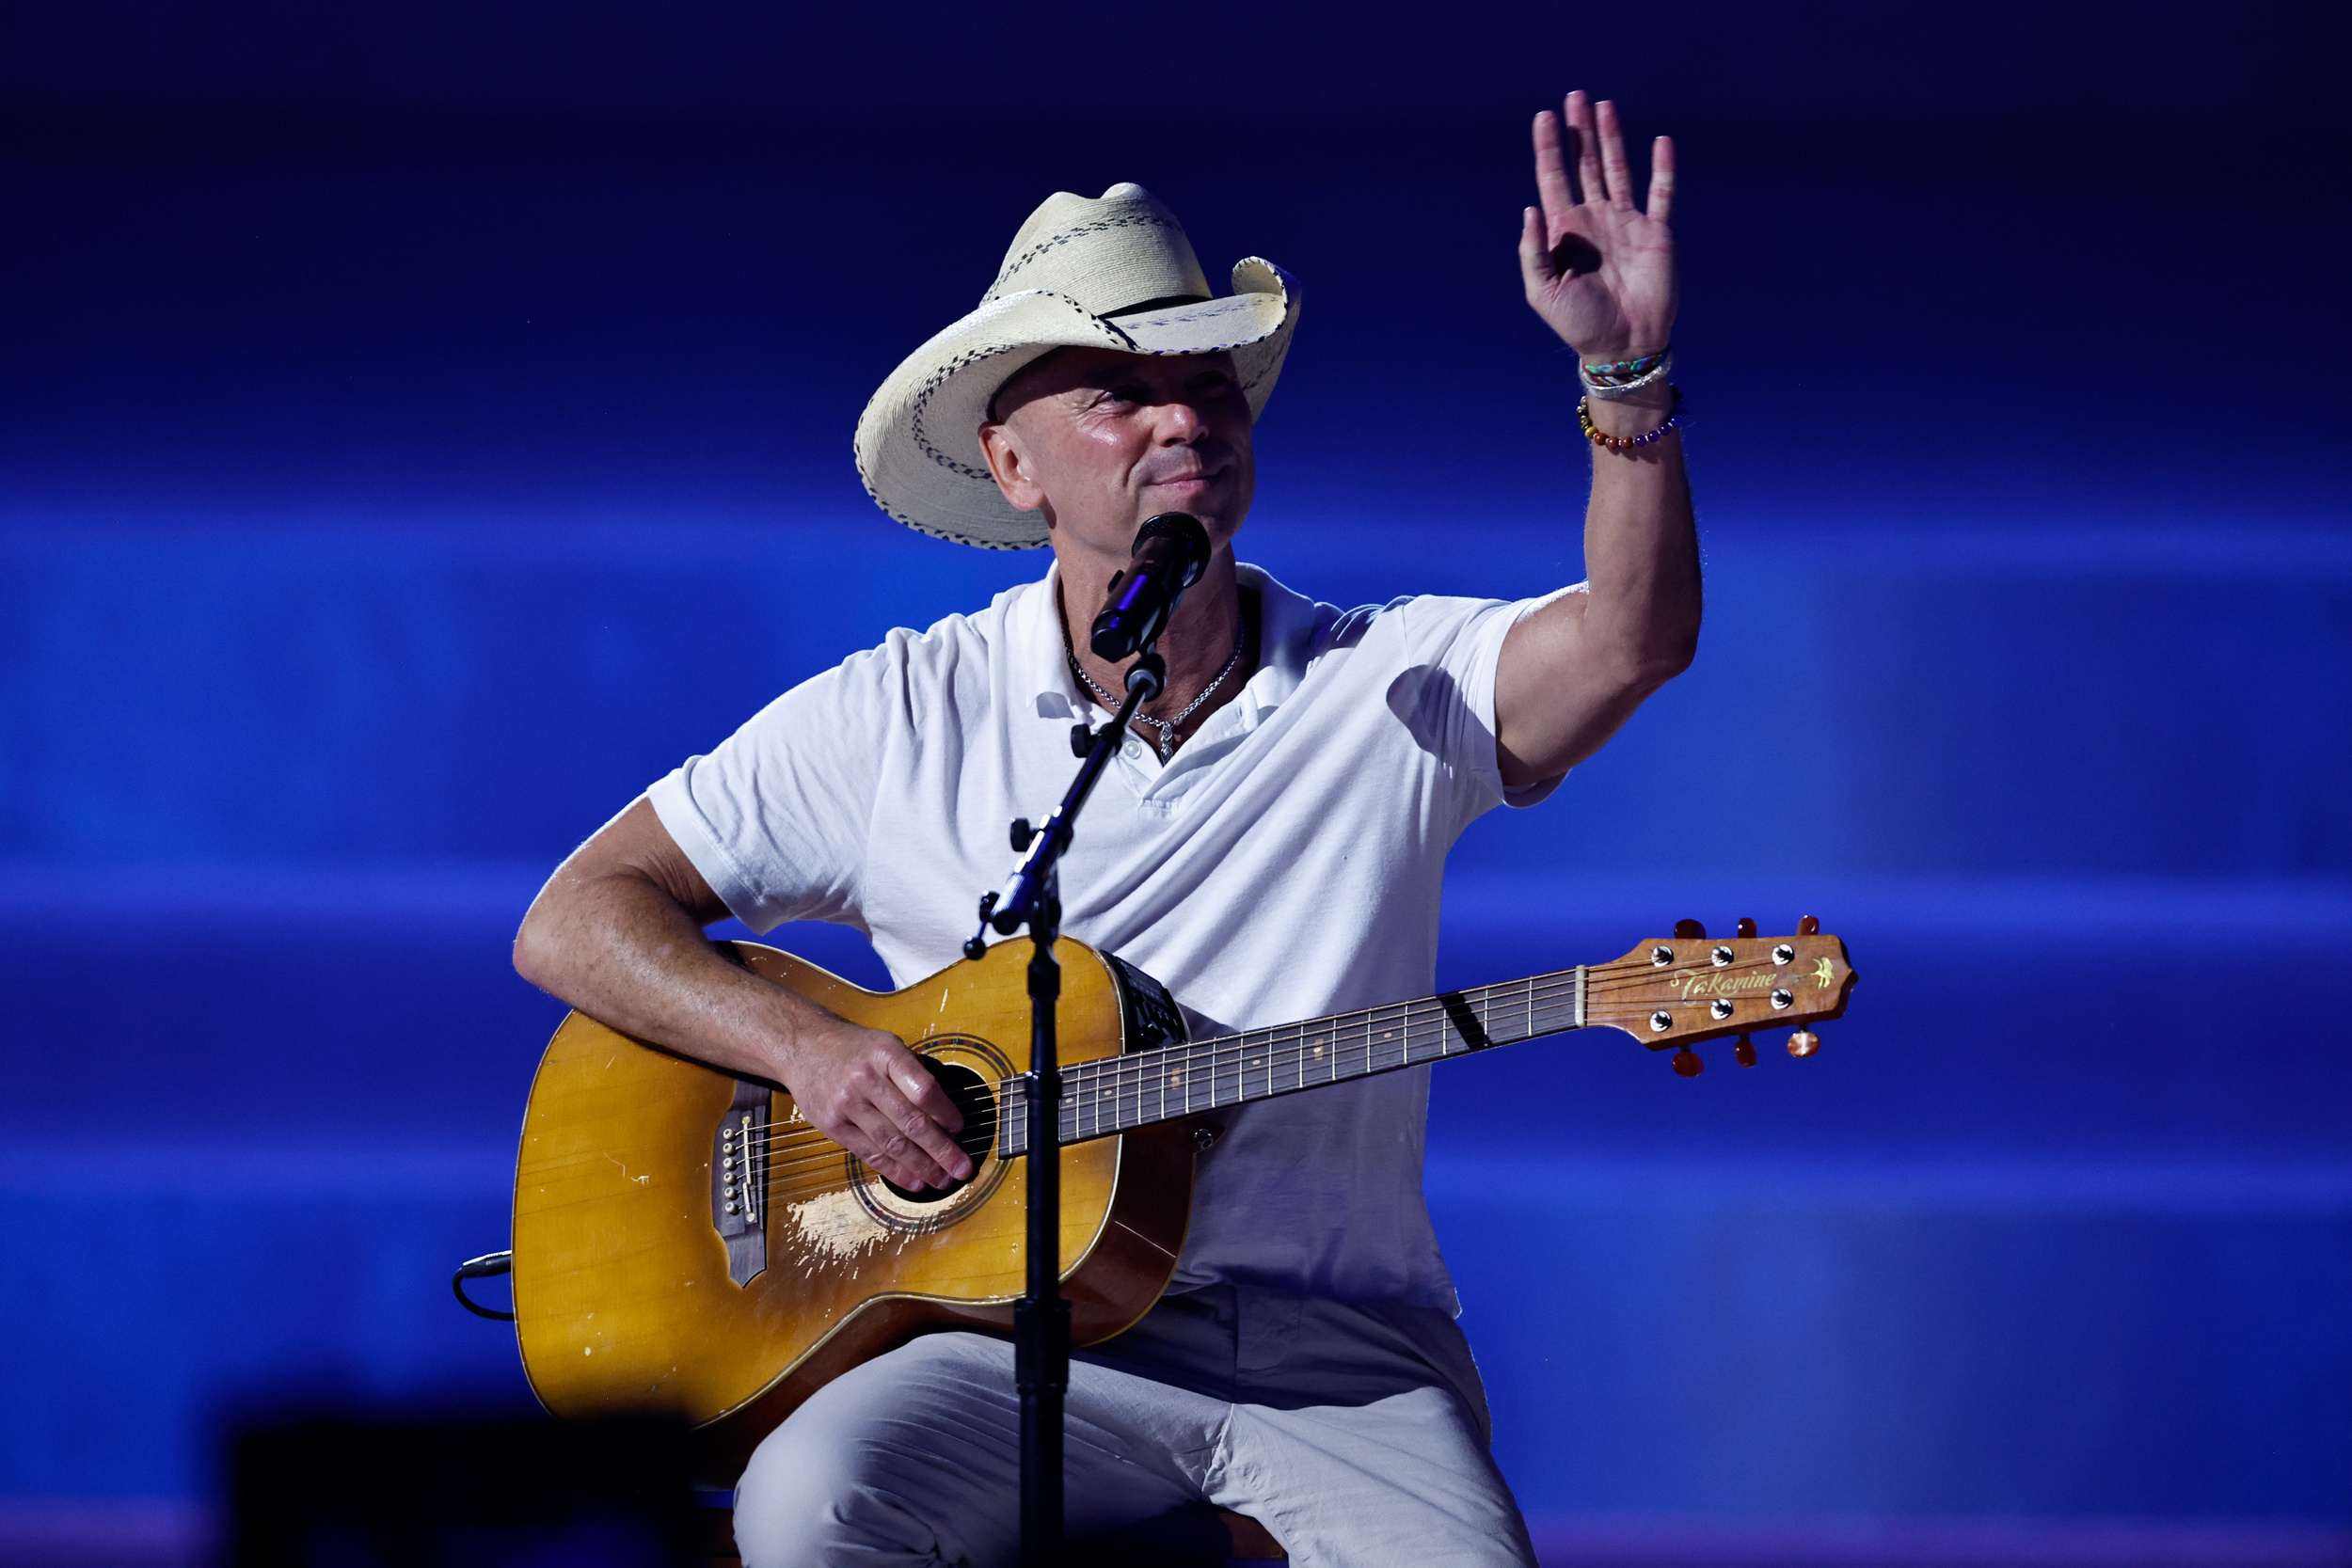 <p>When it comes to hosting a summer musical party, Chesney is a great host. That's why there's likely plenty of fun to be had when Chesney takes the stage this year for a monster stadium tour. <a href="https://www.kennychesney.com/tour">More than 20 stops</a> are scheduled, hitting some of America's biggest venues, like the April 20 opener at Tampa's Raymond James Stadium, Chicago's Soldier Field, AT&T Stadium in suburban Dallas and SoFi Stadium in the greater Los Angeles proper. The Zac Brown Band will tag along for fun, making this a must-see concert event for country music fans.</p><p>You may also like: <a href='https://www.yardbarker.com/entertainment/articles/the_most_memorable_private_eye_movies_and_tv_shows_set_in_los_angeles/s1__40302589'>The most memorable private eye movies and TV shows set in Los Angeles</a></p>